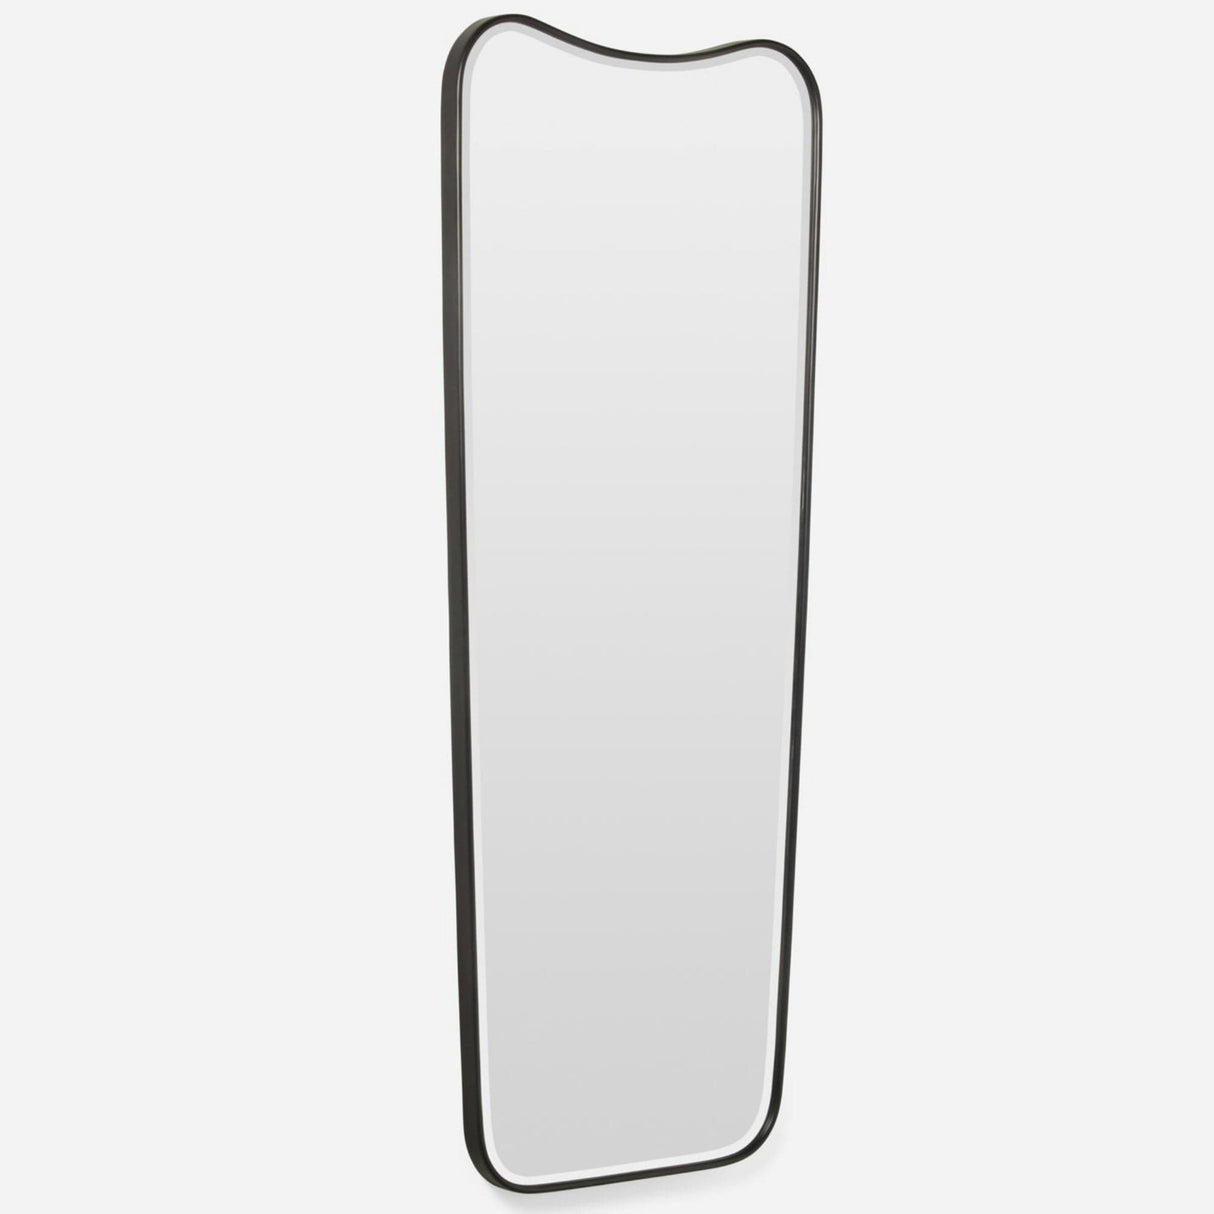 Made Goods Gage Mirror Wall